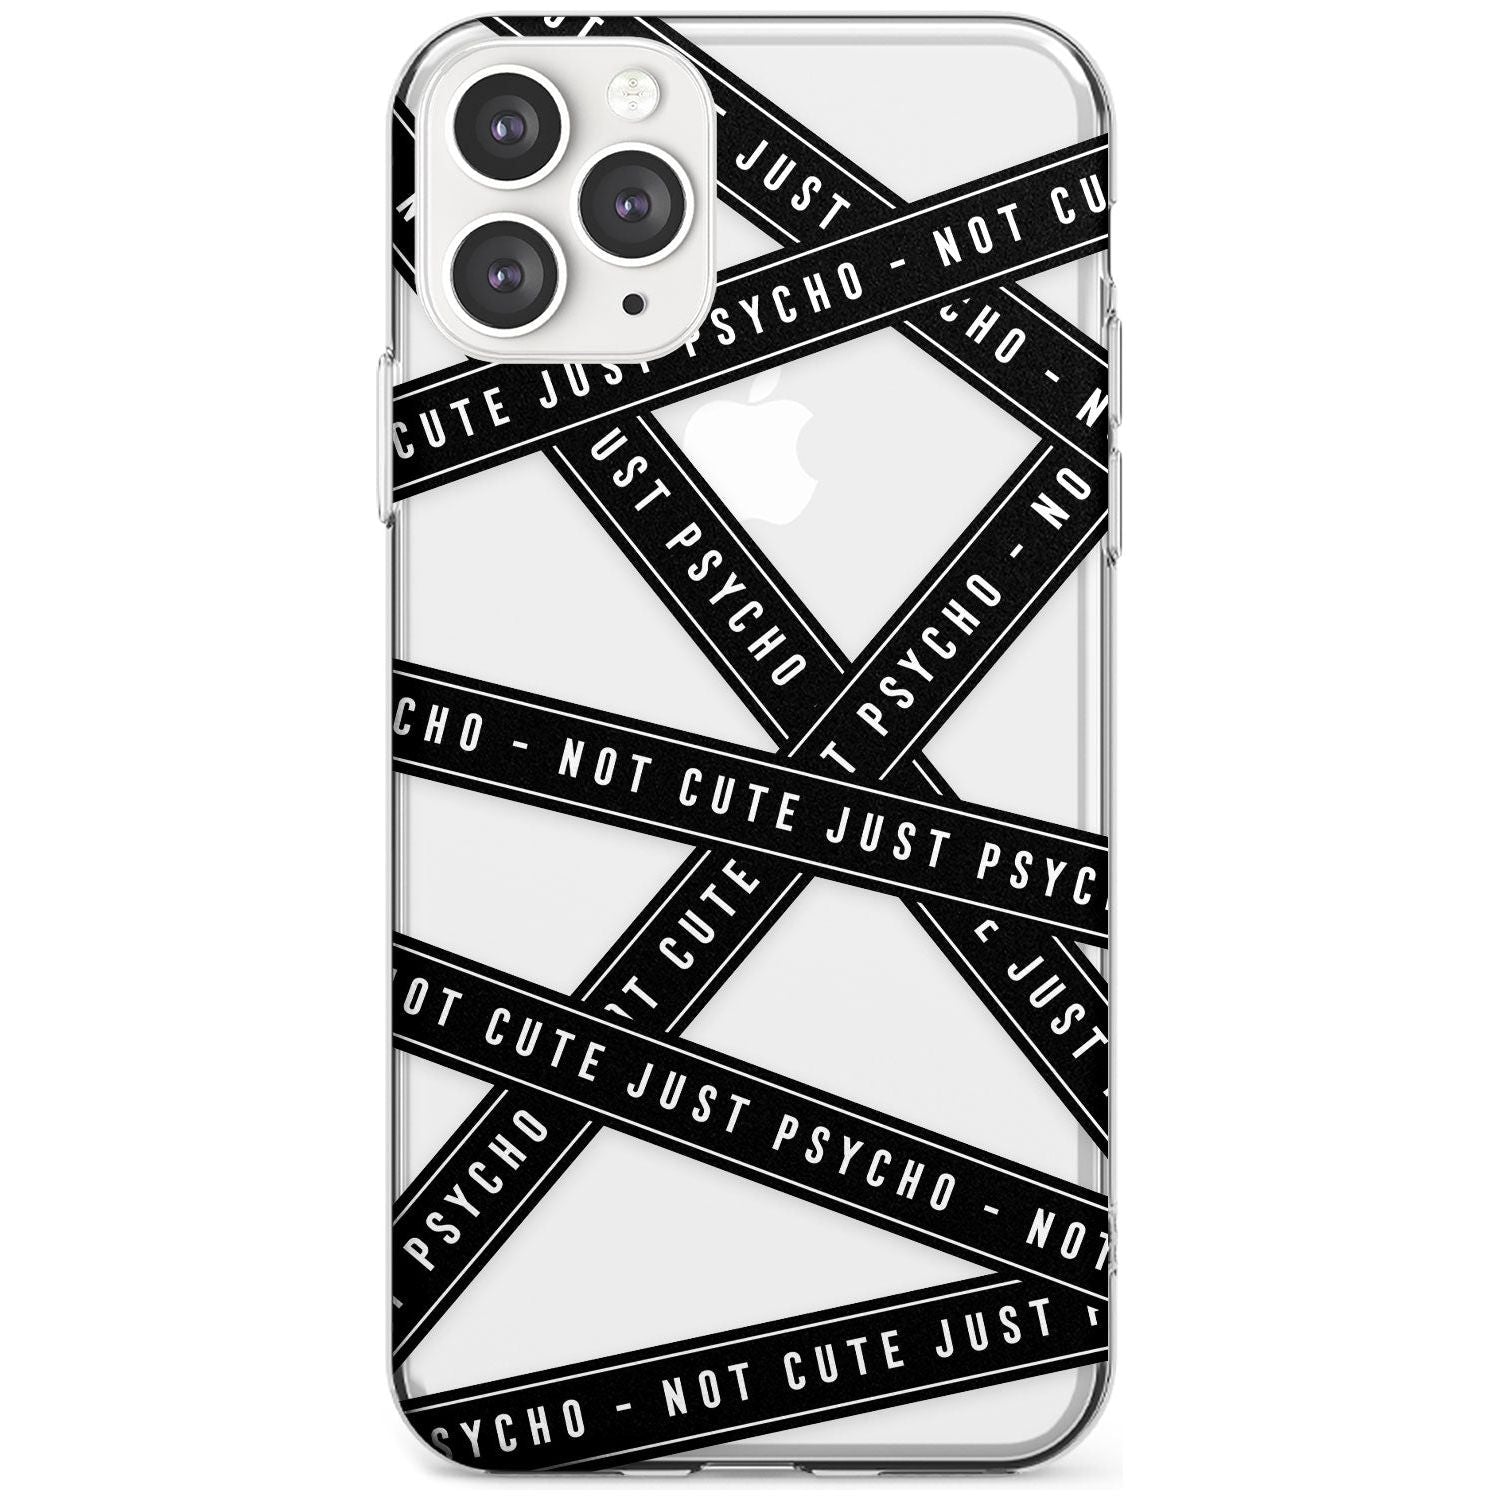 Caution Tape (Clear) Not Cute Just Psycho Slim TPU Phone Case for iPhone 11 Pro Max